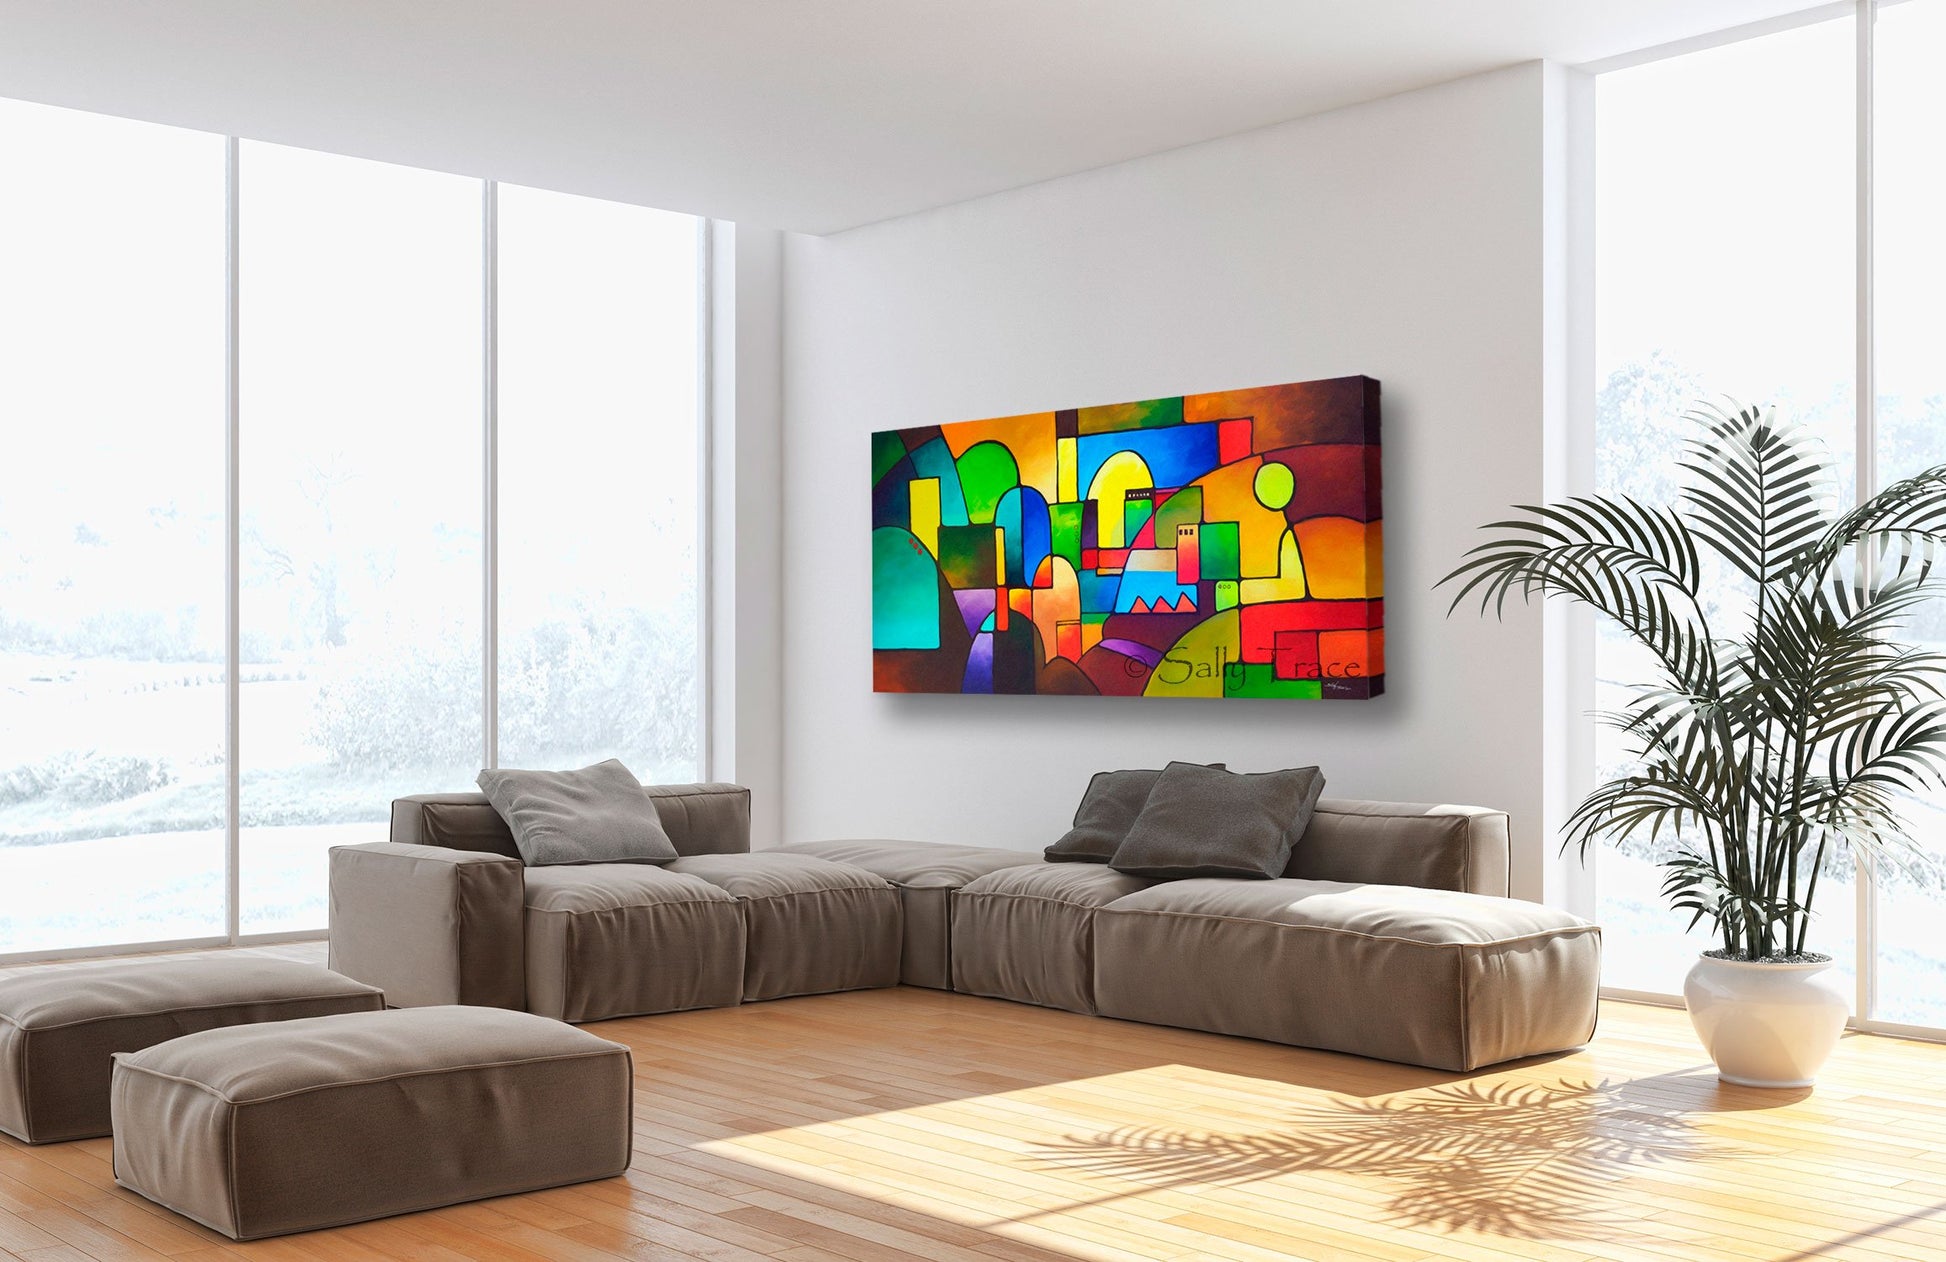 Urbanity 2, giclee print on stretched canvas for sale by Sally Trace, room view